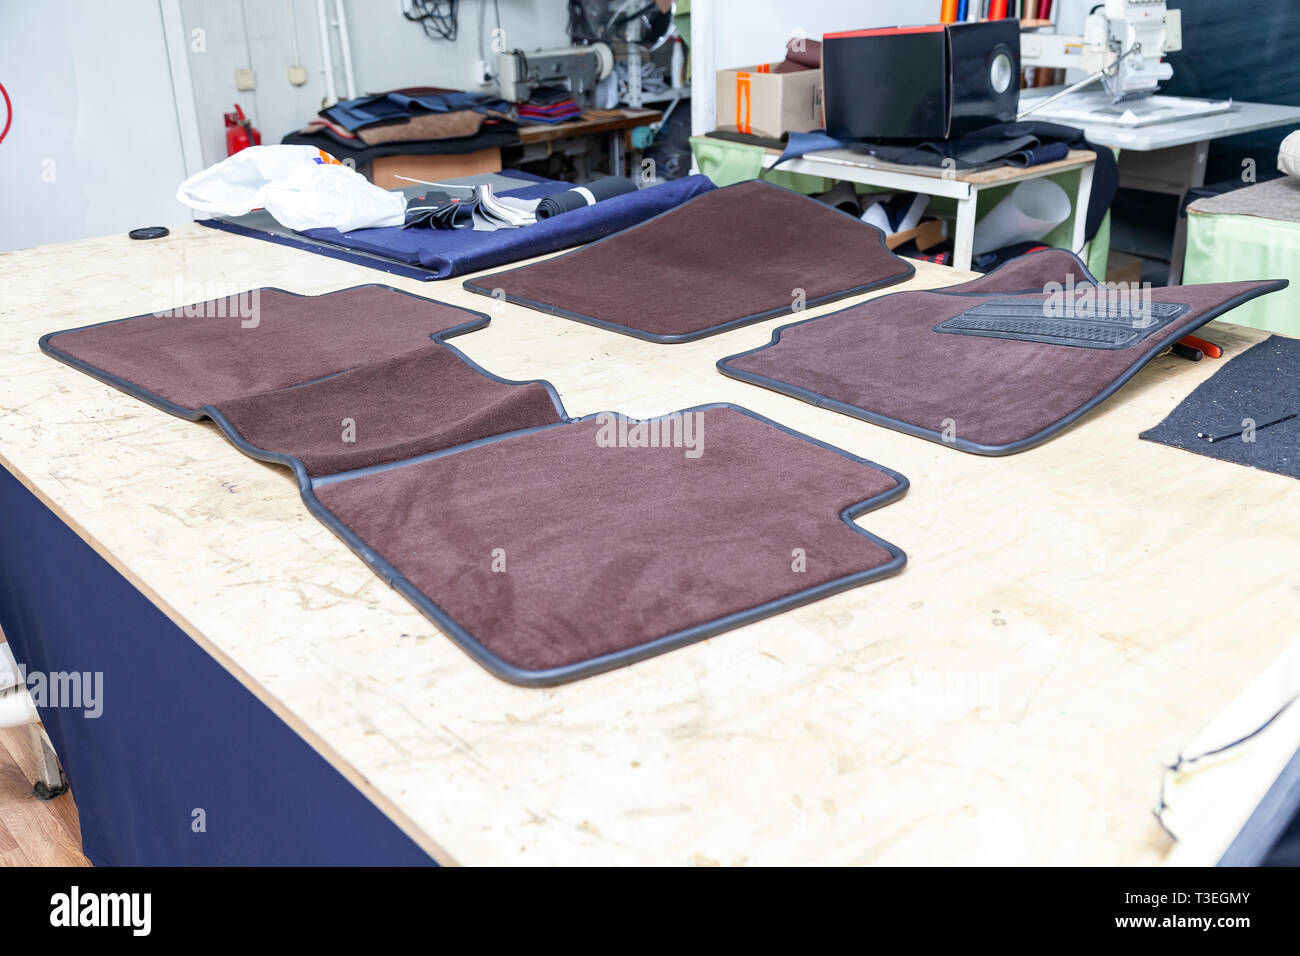 https://c8.alamy.com/comp/T3EGMY/car-3d-handmade-floor-mats-of-brown-color-from-wool-for-front-and-rear-passengers-of-a-vehicle-in-an-interior-design-workshop-with-tools-T3EGMY.jpg